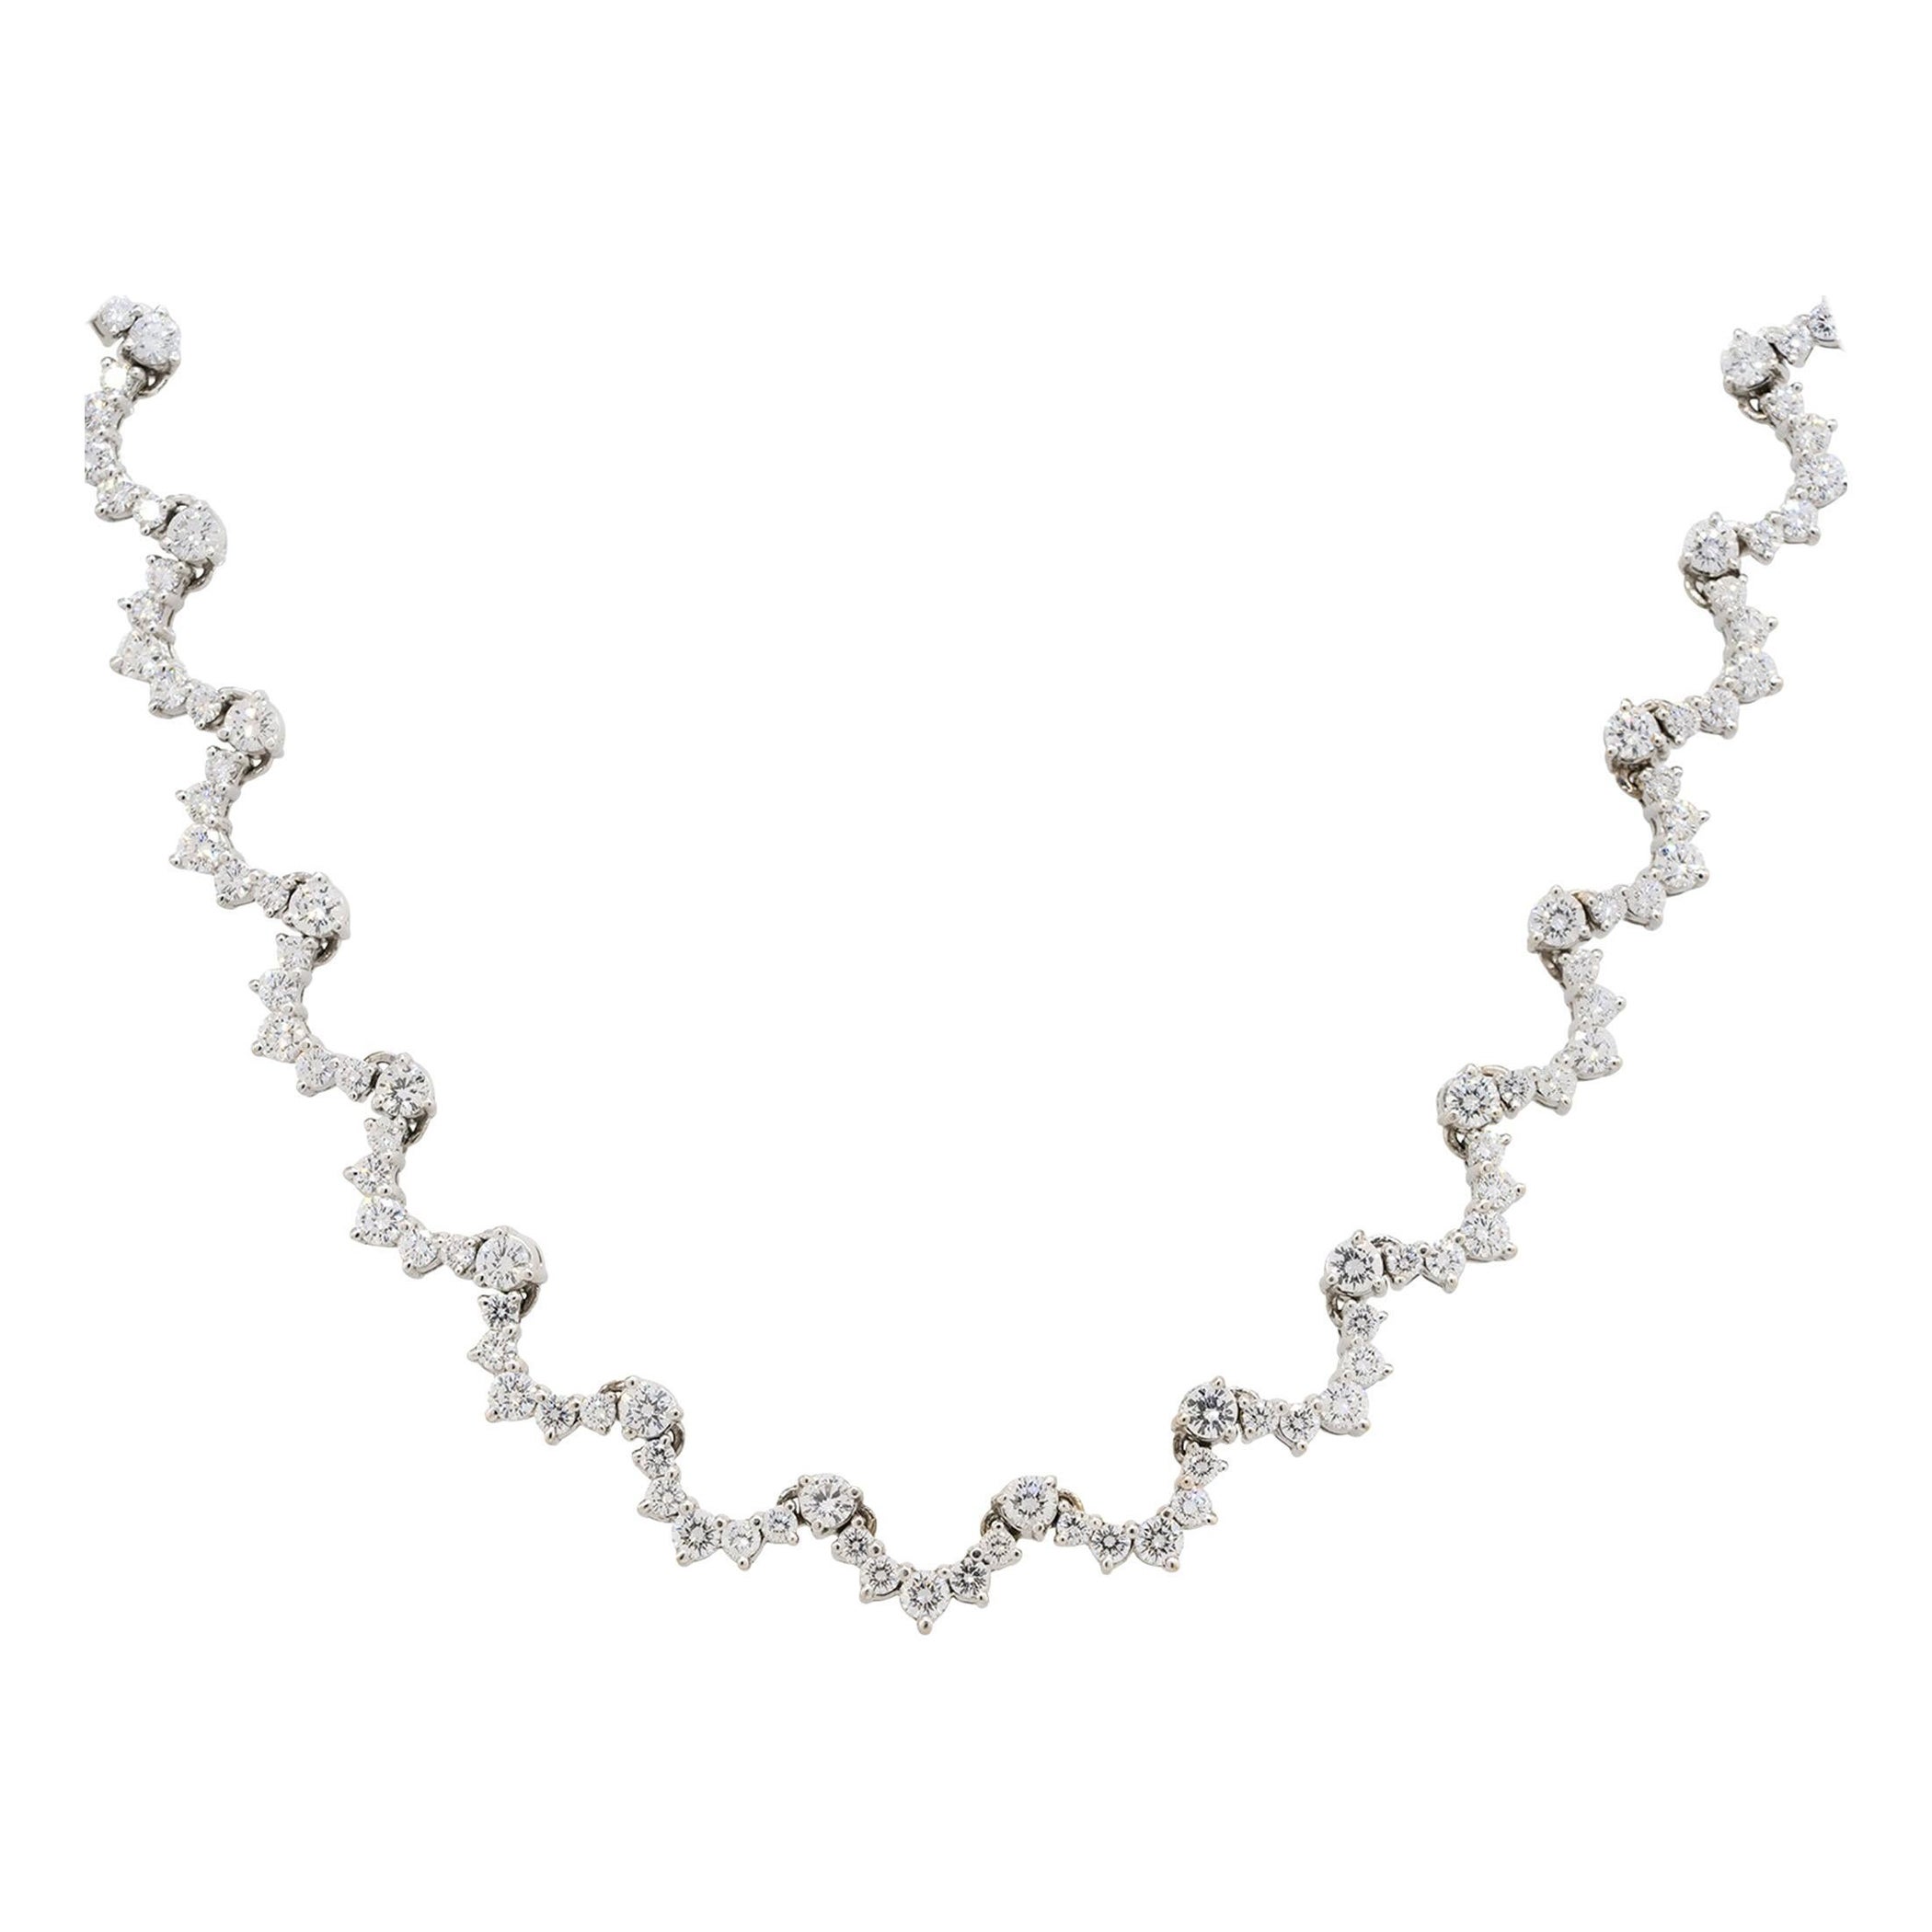 Update more than 161 14 carat diamond necklace latest